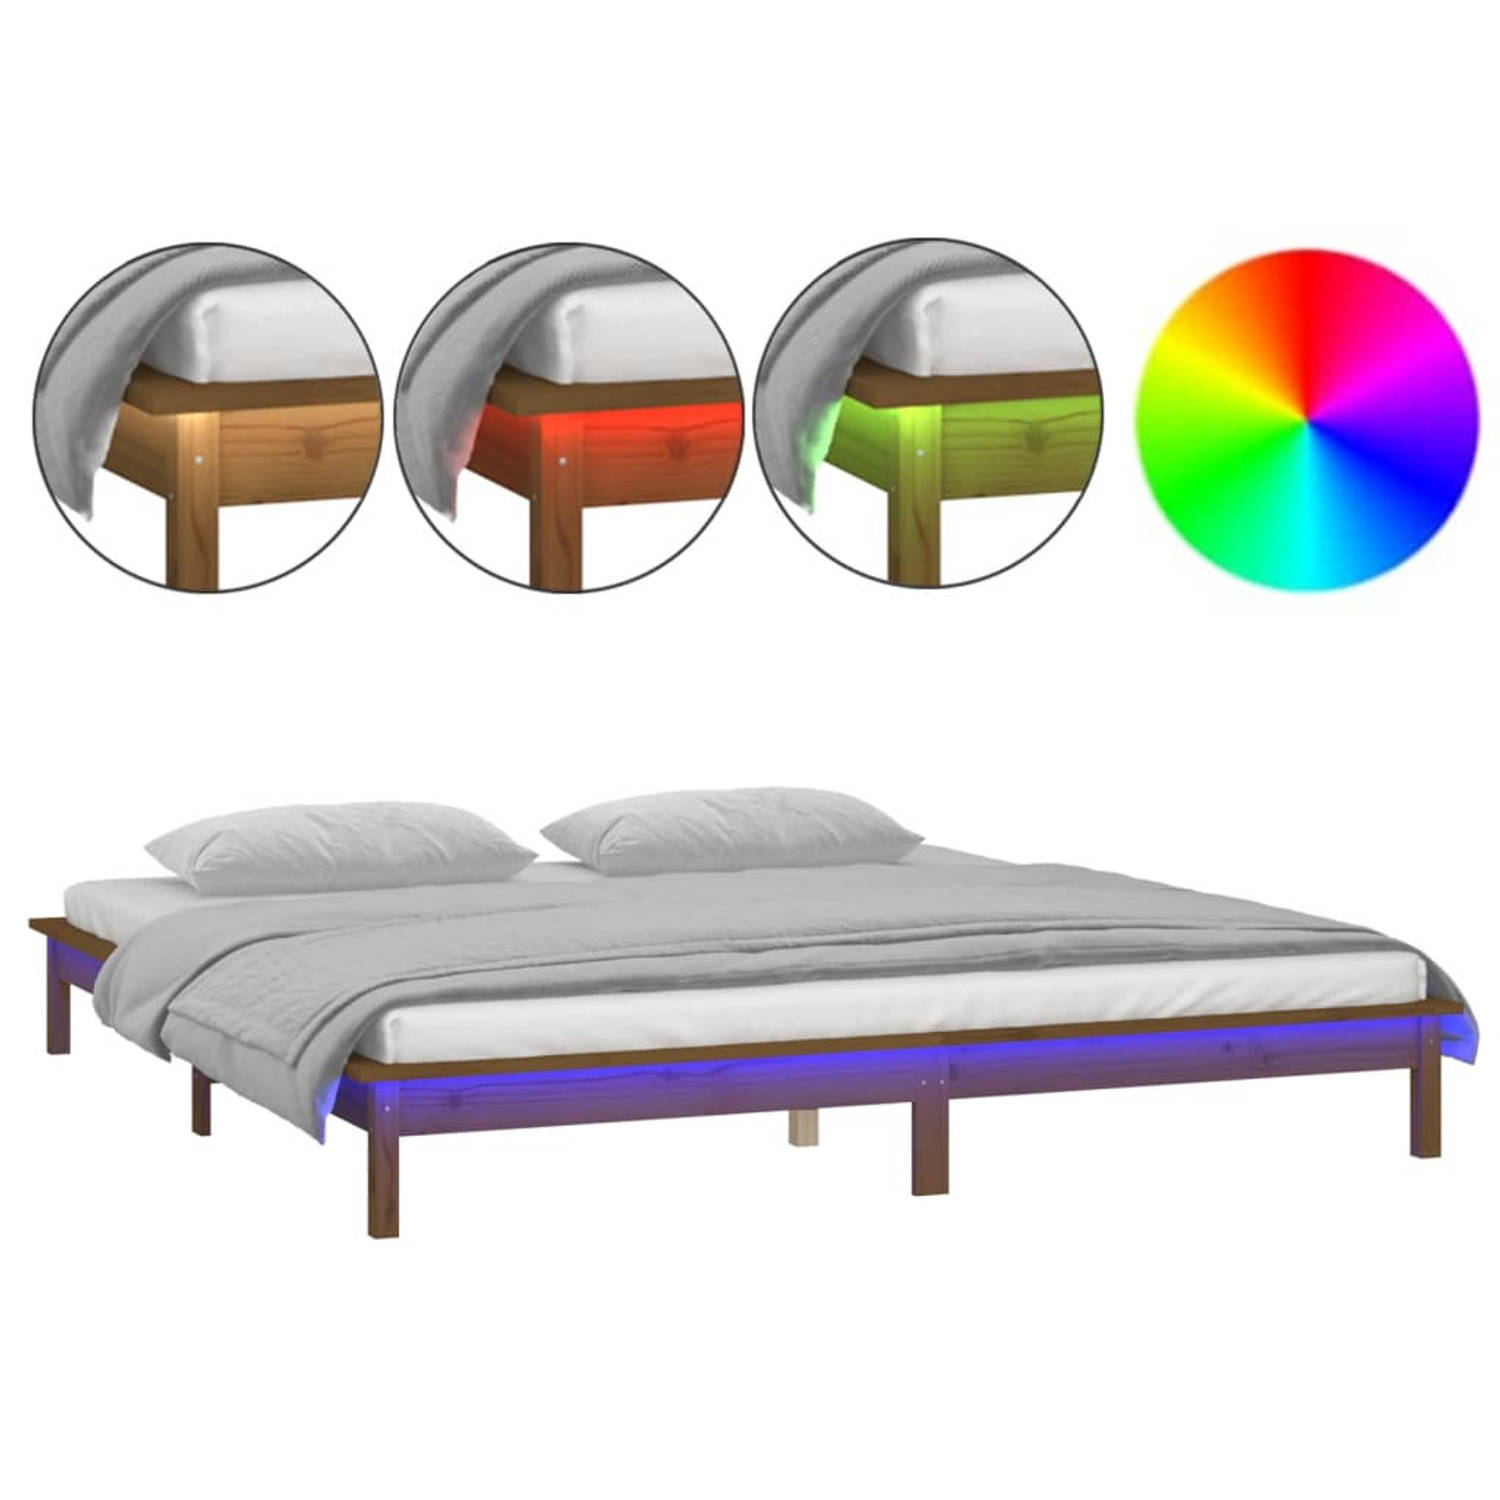 The Living Store Bedframe Grenenhout Honingbruin - 212x151.5x26 cm - RGB LED-verlichting